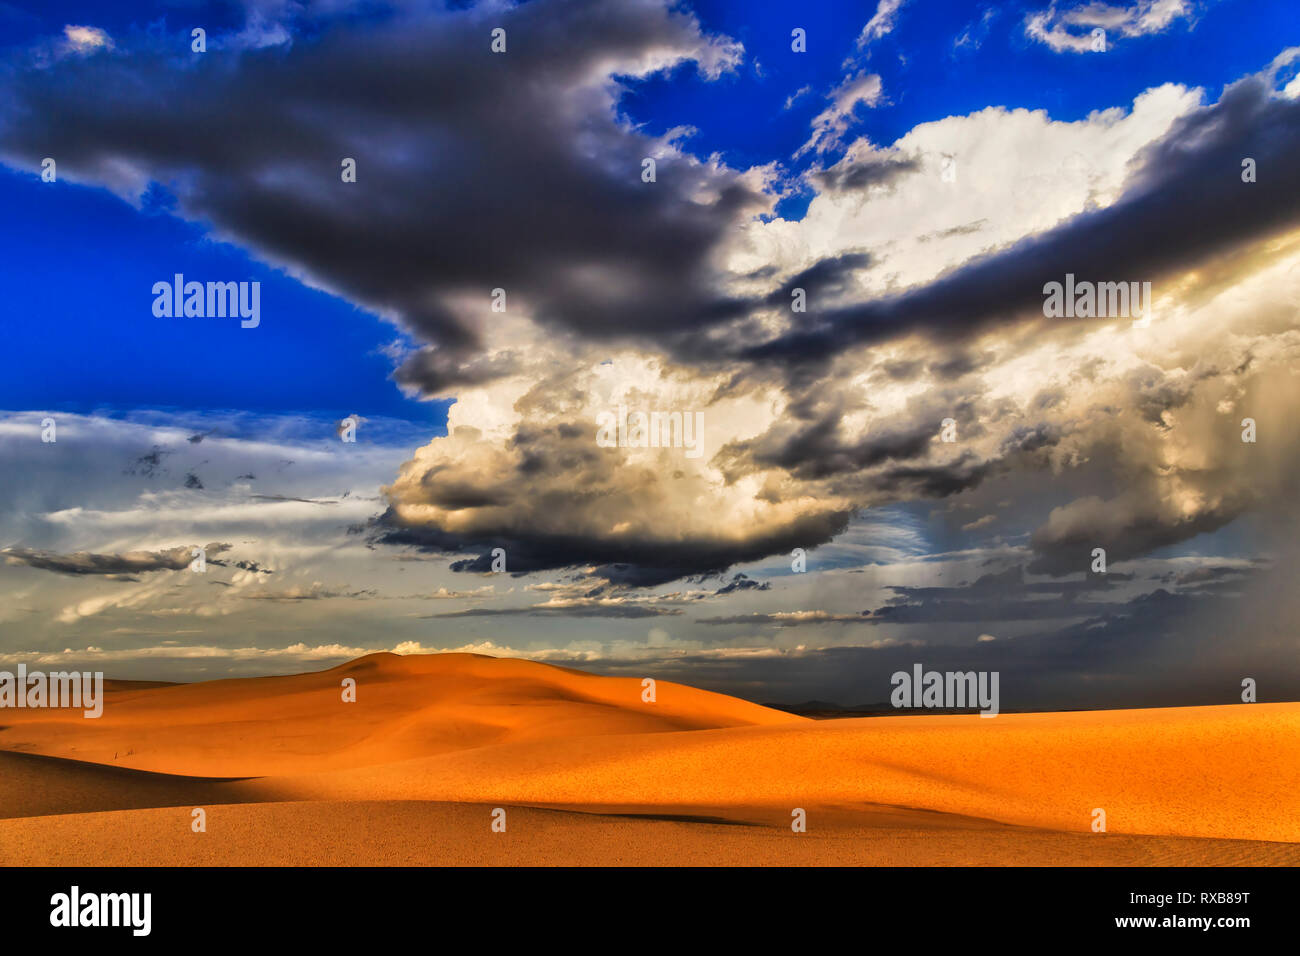 Sunlit dry desert at sunset during storm with huge shaped cloud over sand dunes and horizon in blue sky - Stockton beach of Hunter region, Australia. Stock Photo